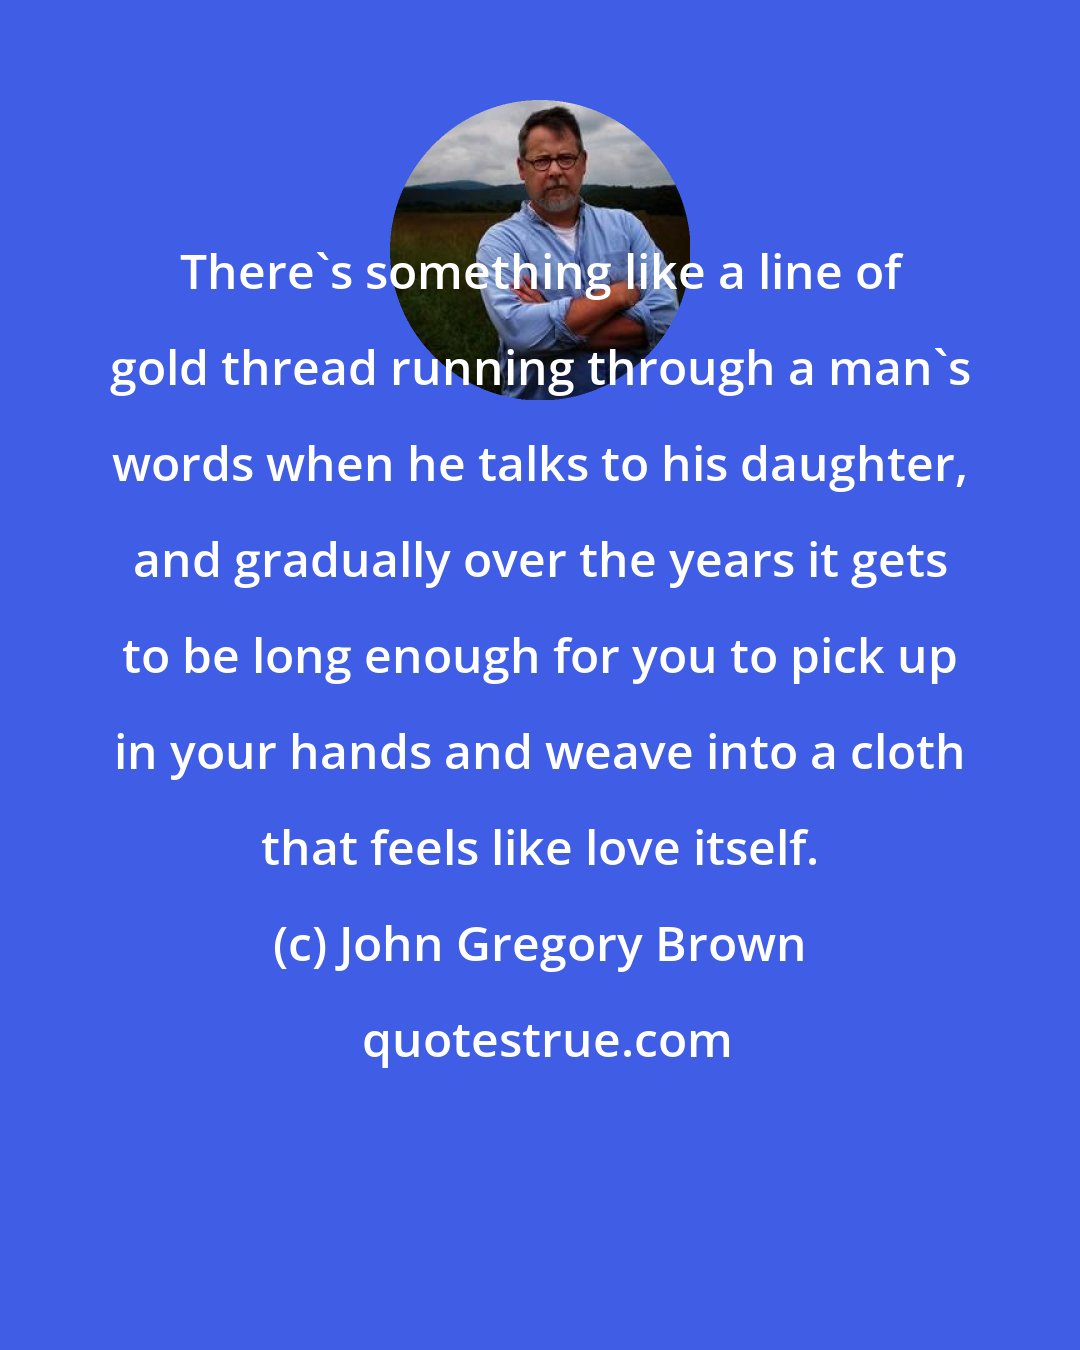 John Gregory Brown: There's something like a line of gold thread running through a man's words when he talks to his daughter, and gradually over the years it gets to be long enough for you to pick up in your hands and weave into a cloth that feels like love itself.